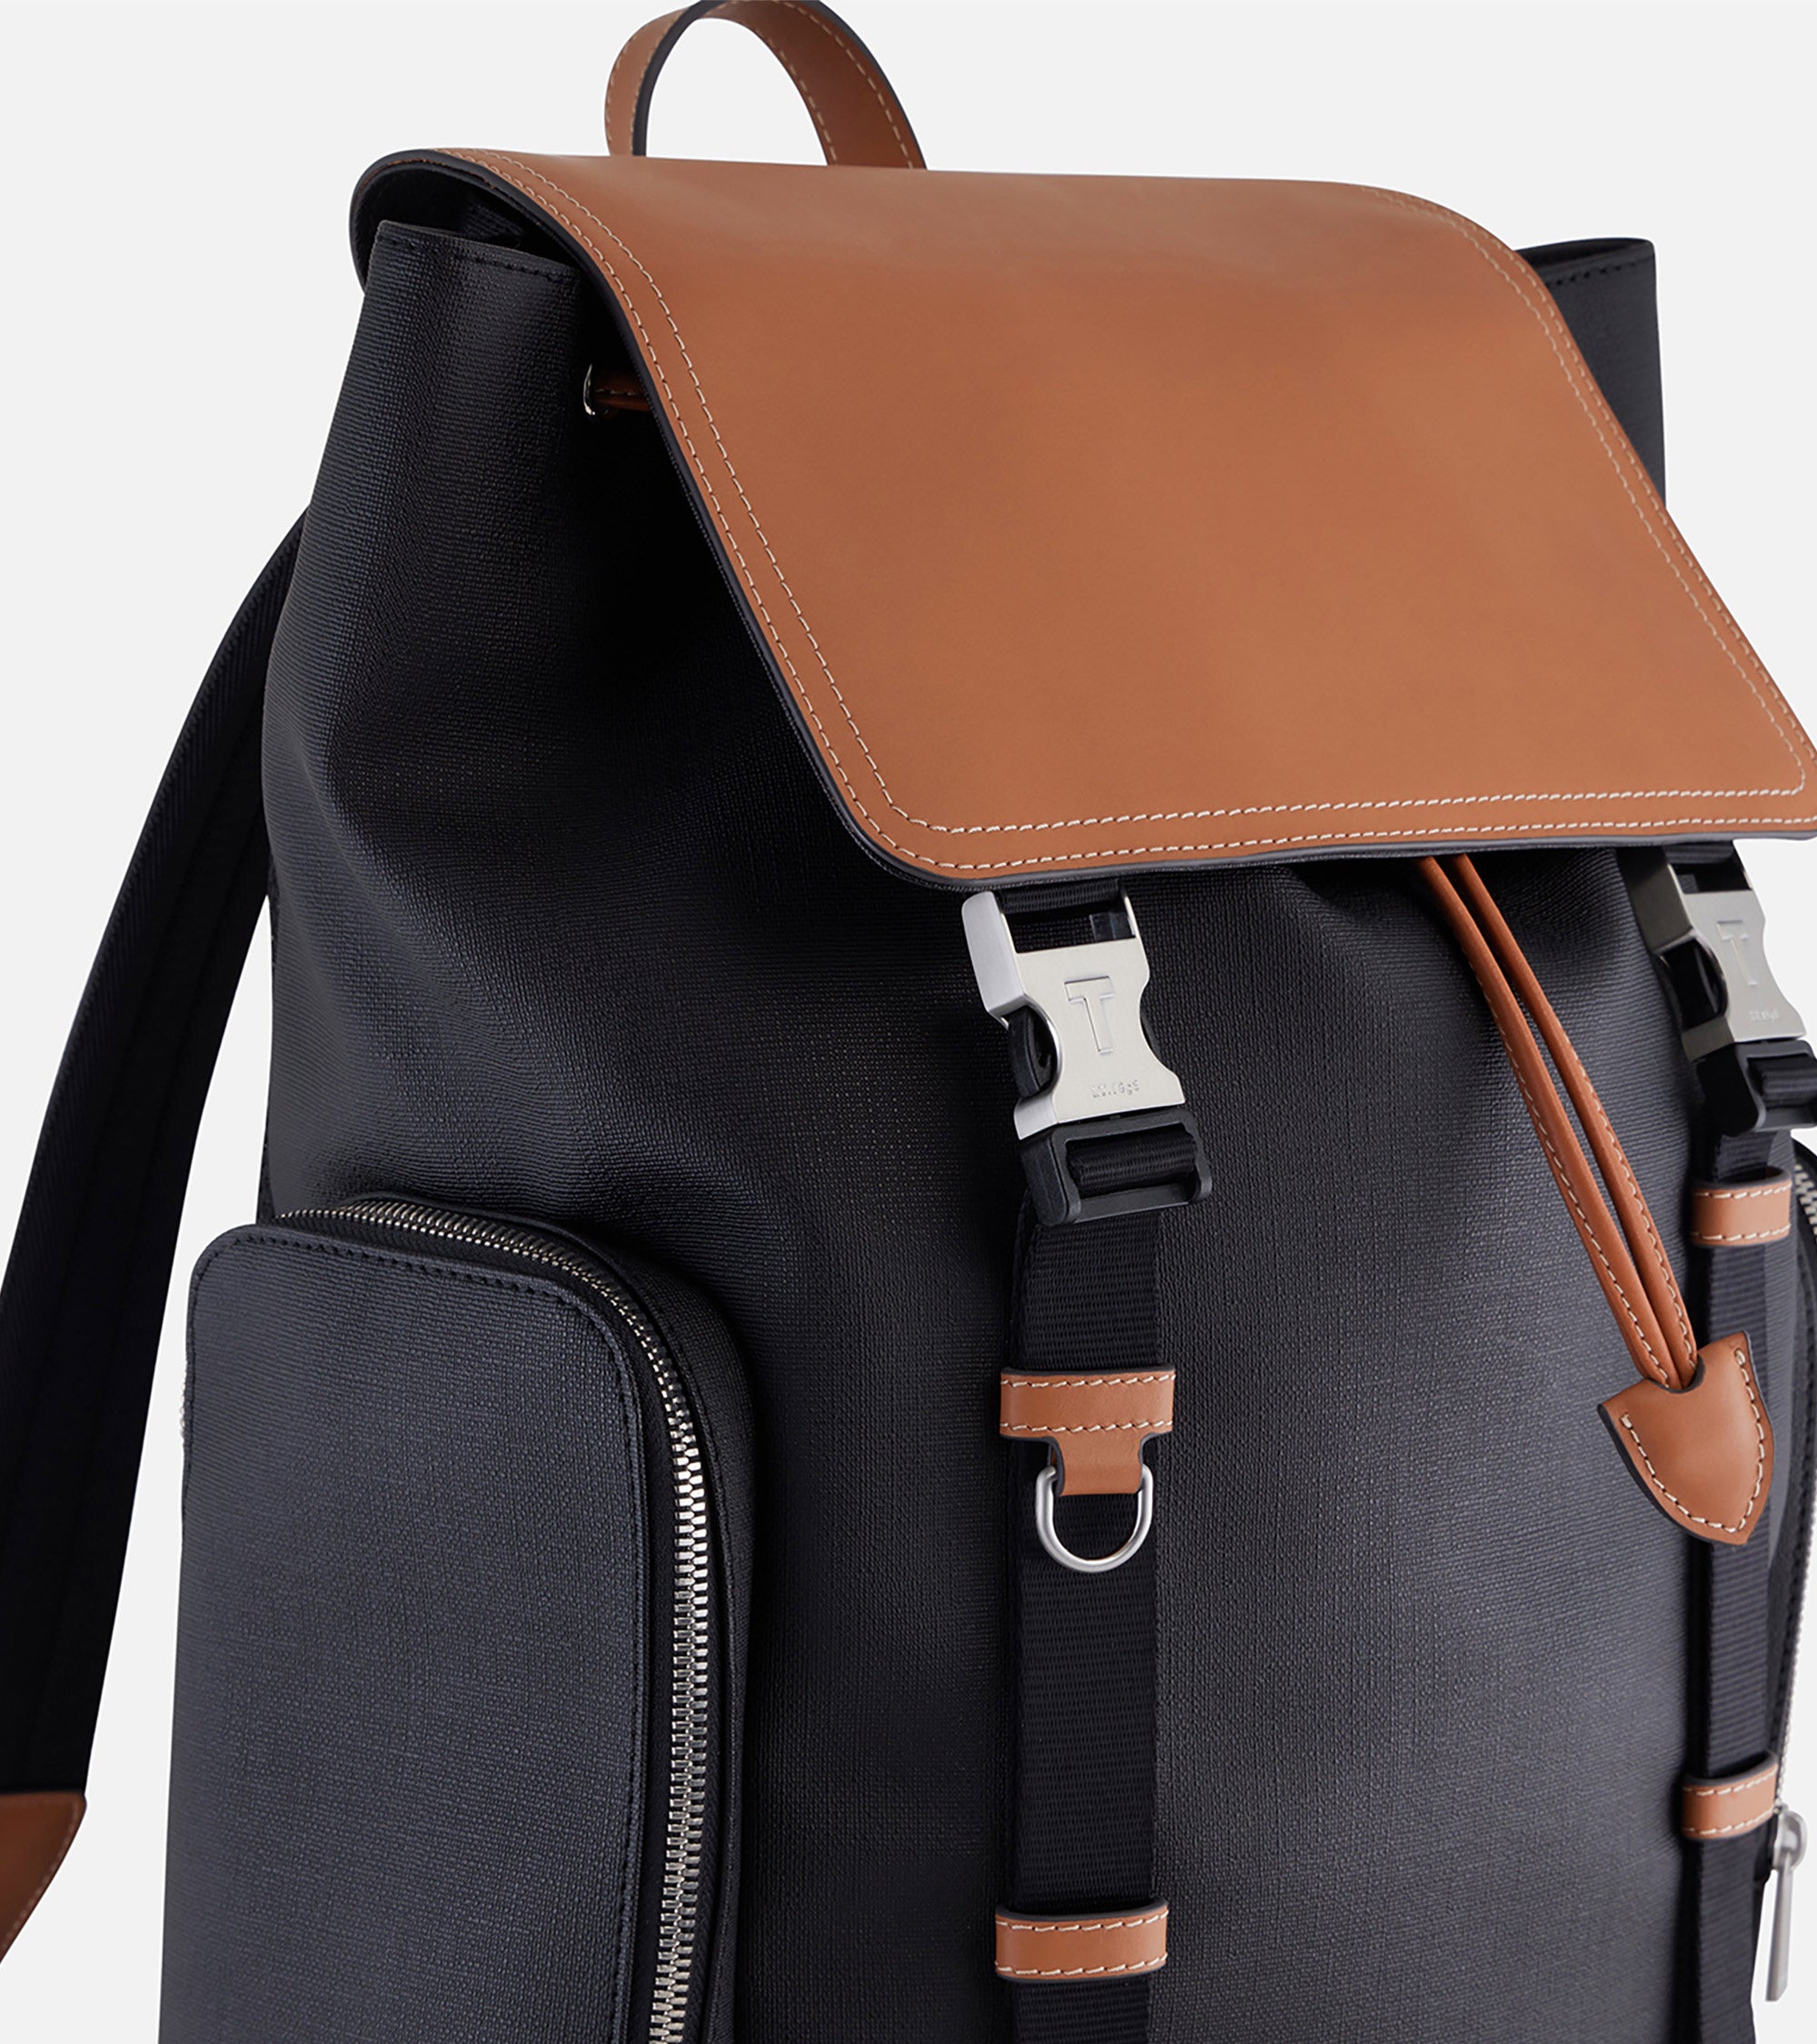 Maurice backpack with flap closure in coated canvas